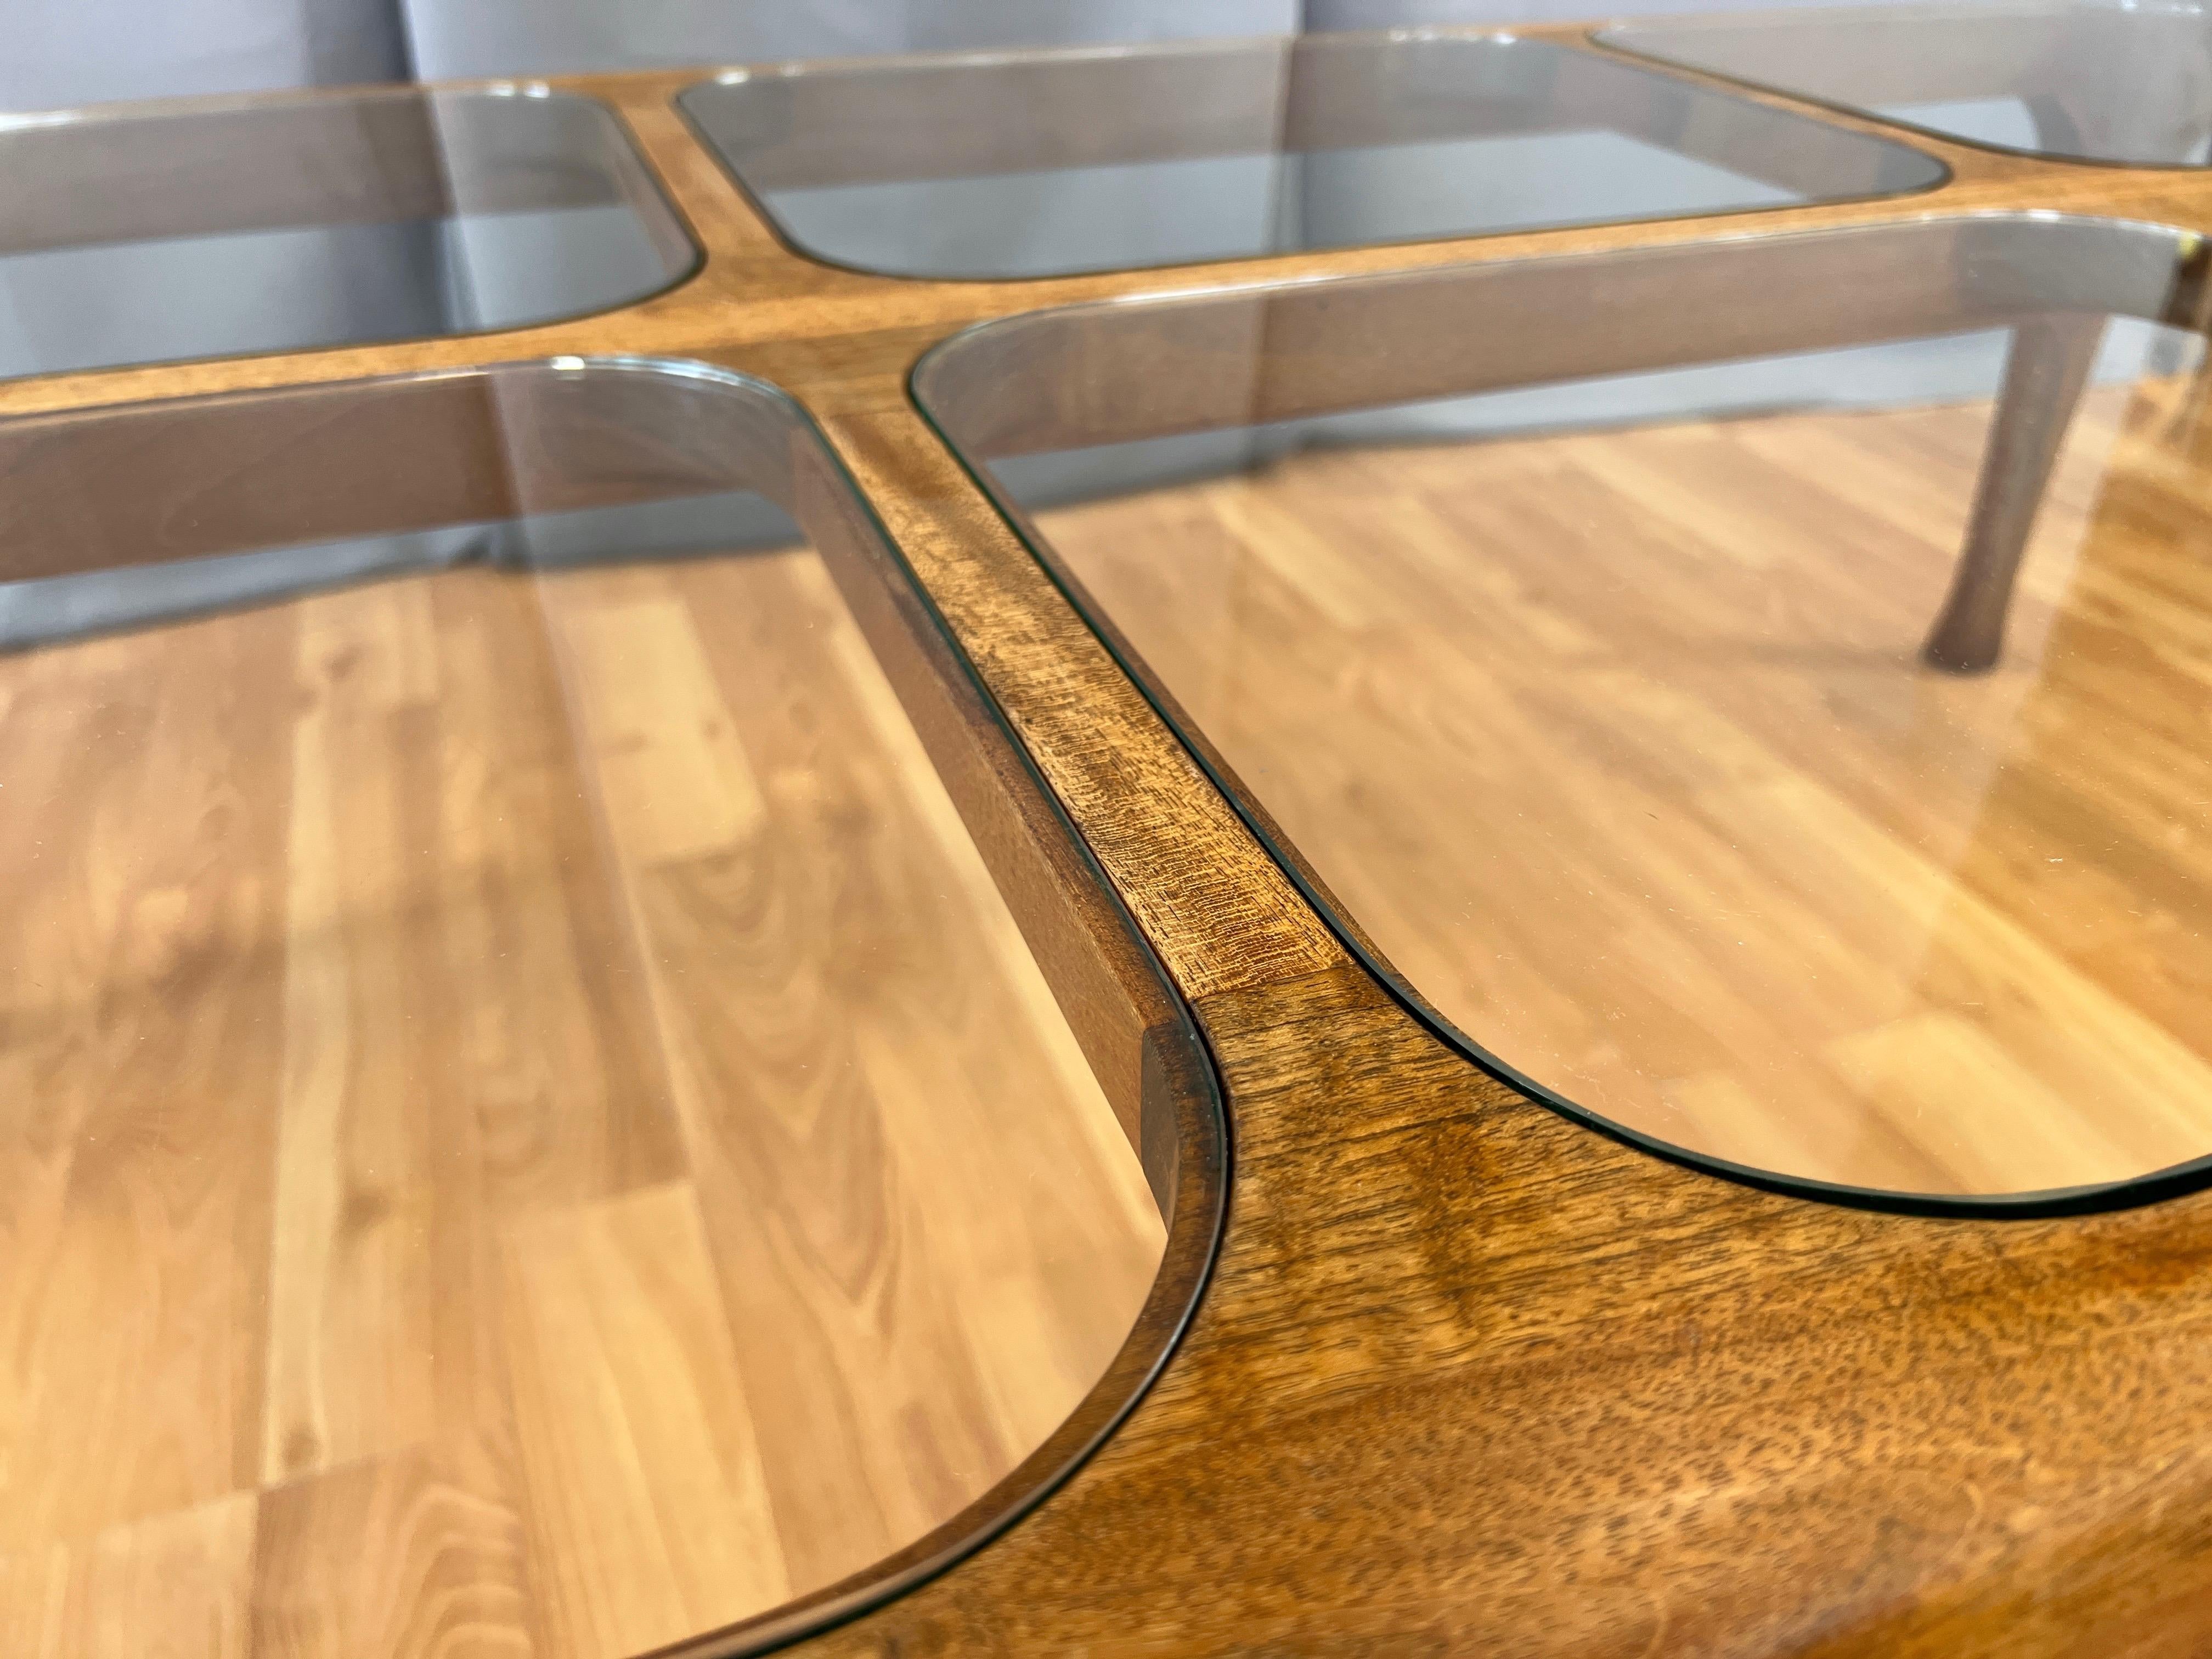 Thomas Saydah Large Walnut and Glass Coffee Table, Signed and Dated, 1982 For Sale 1